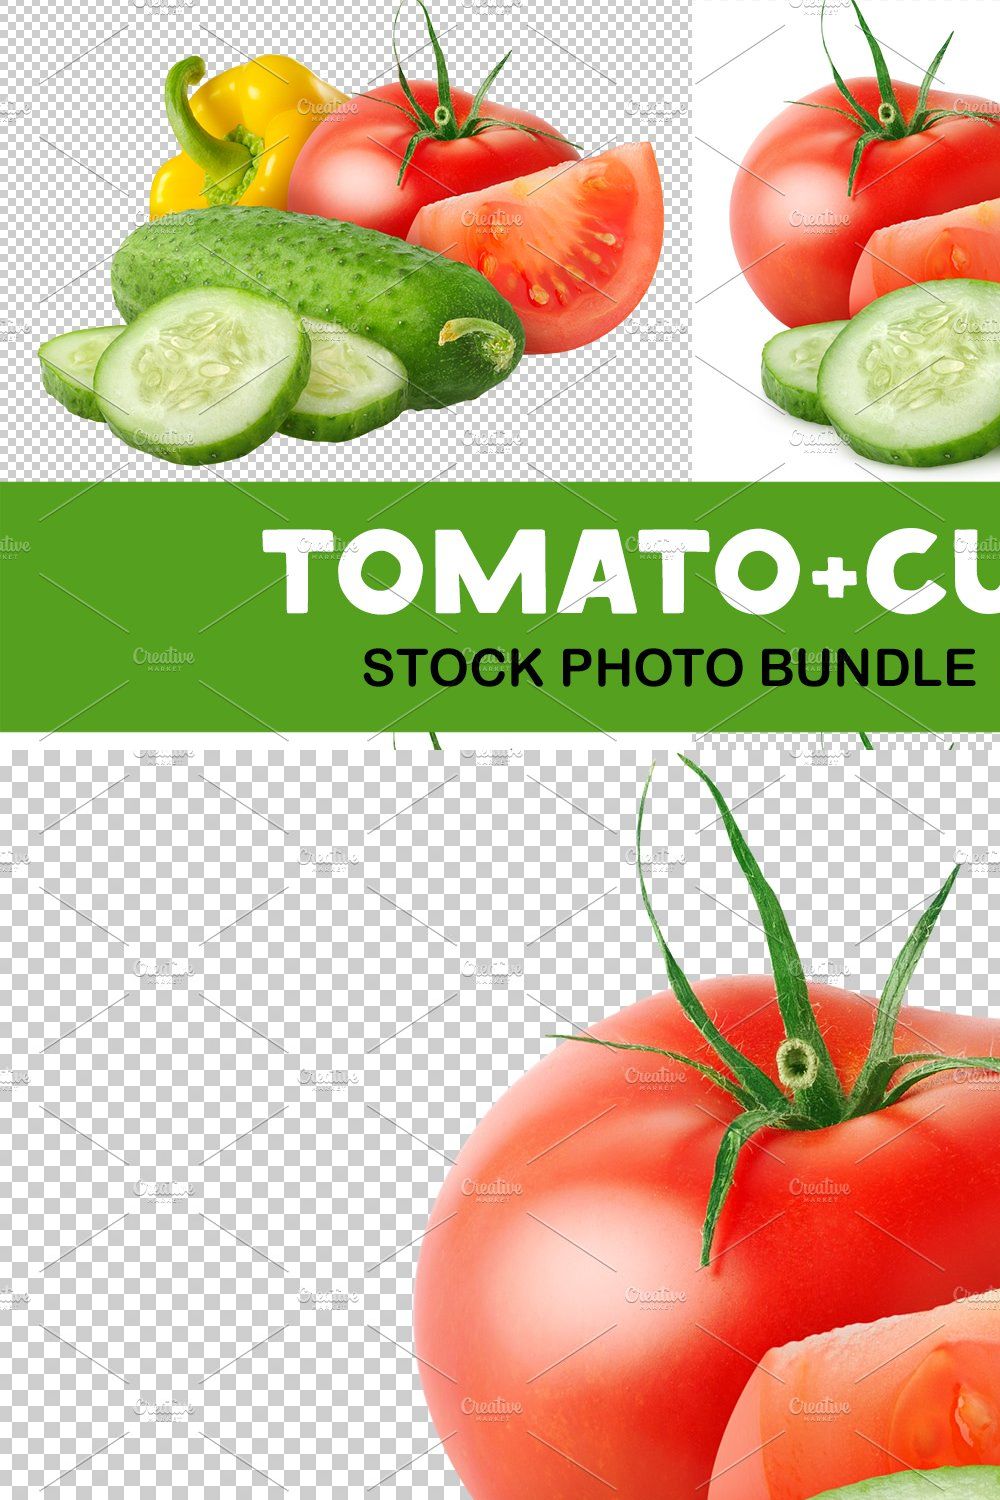 Tomato and cucumber pinterest preview image.